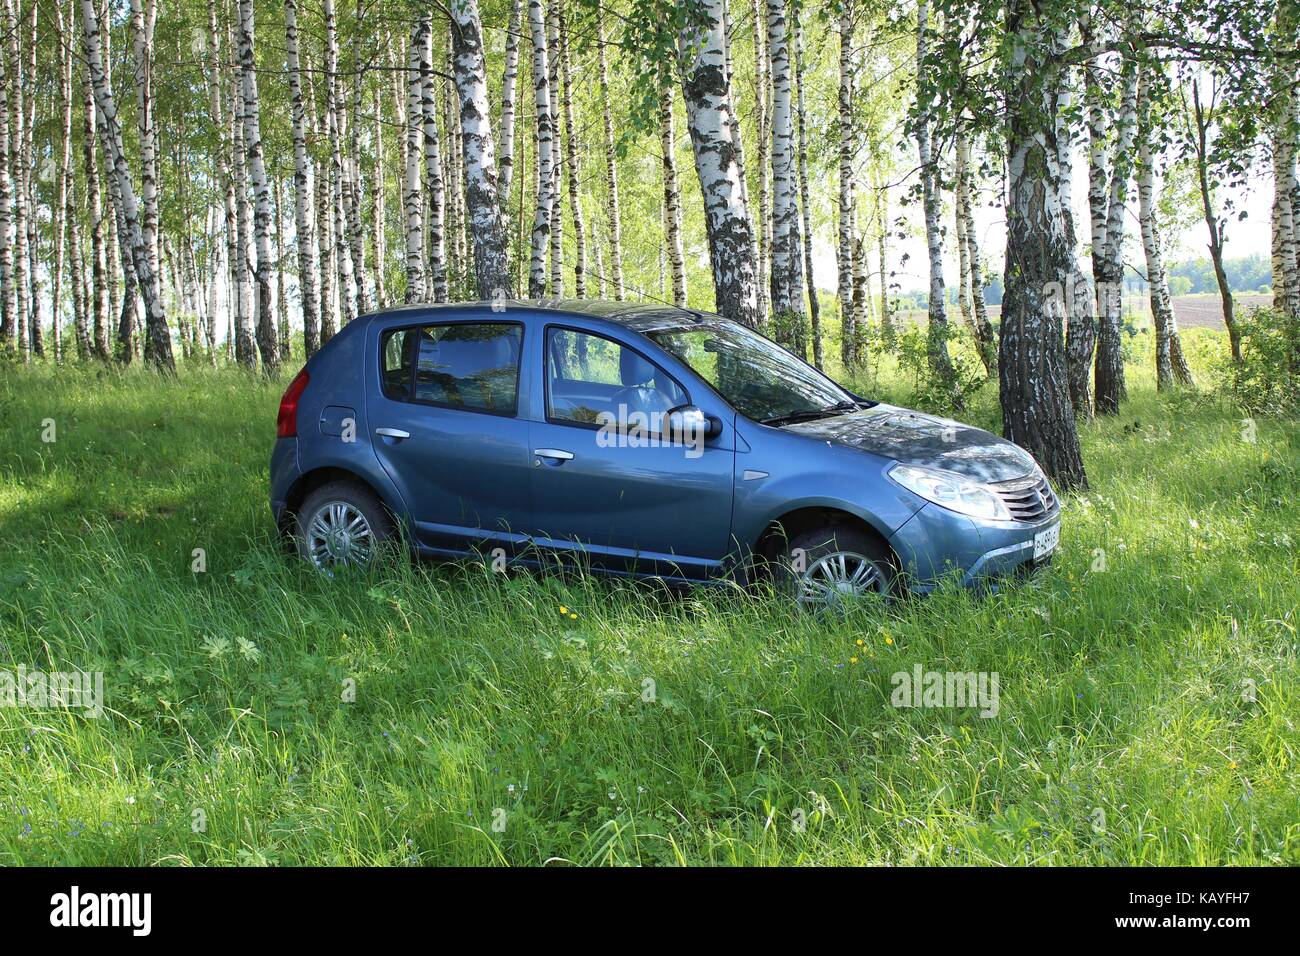 The car 'Renault Sandero' blue color is parked against the backdrop of a birch grove. Stock Photo